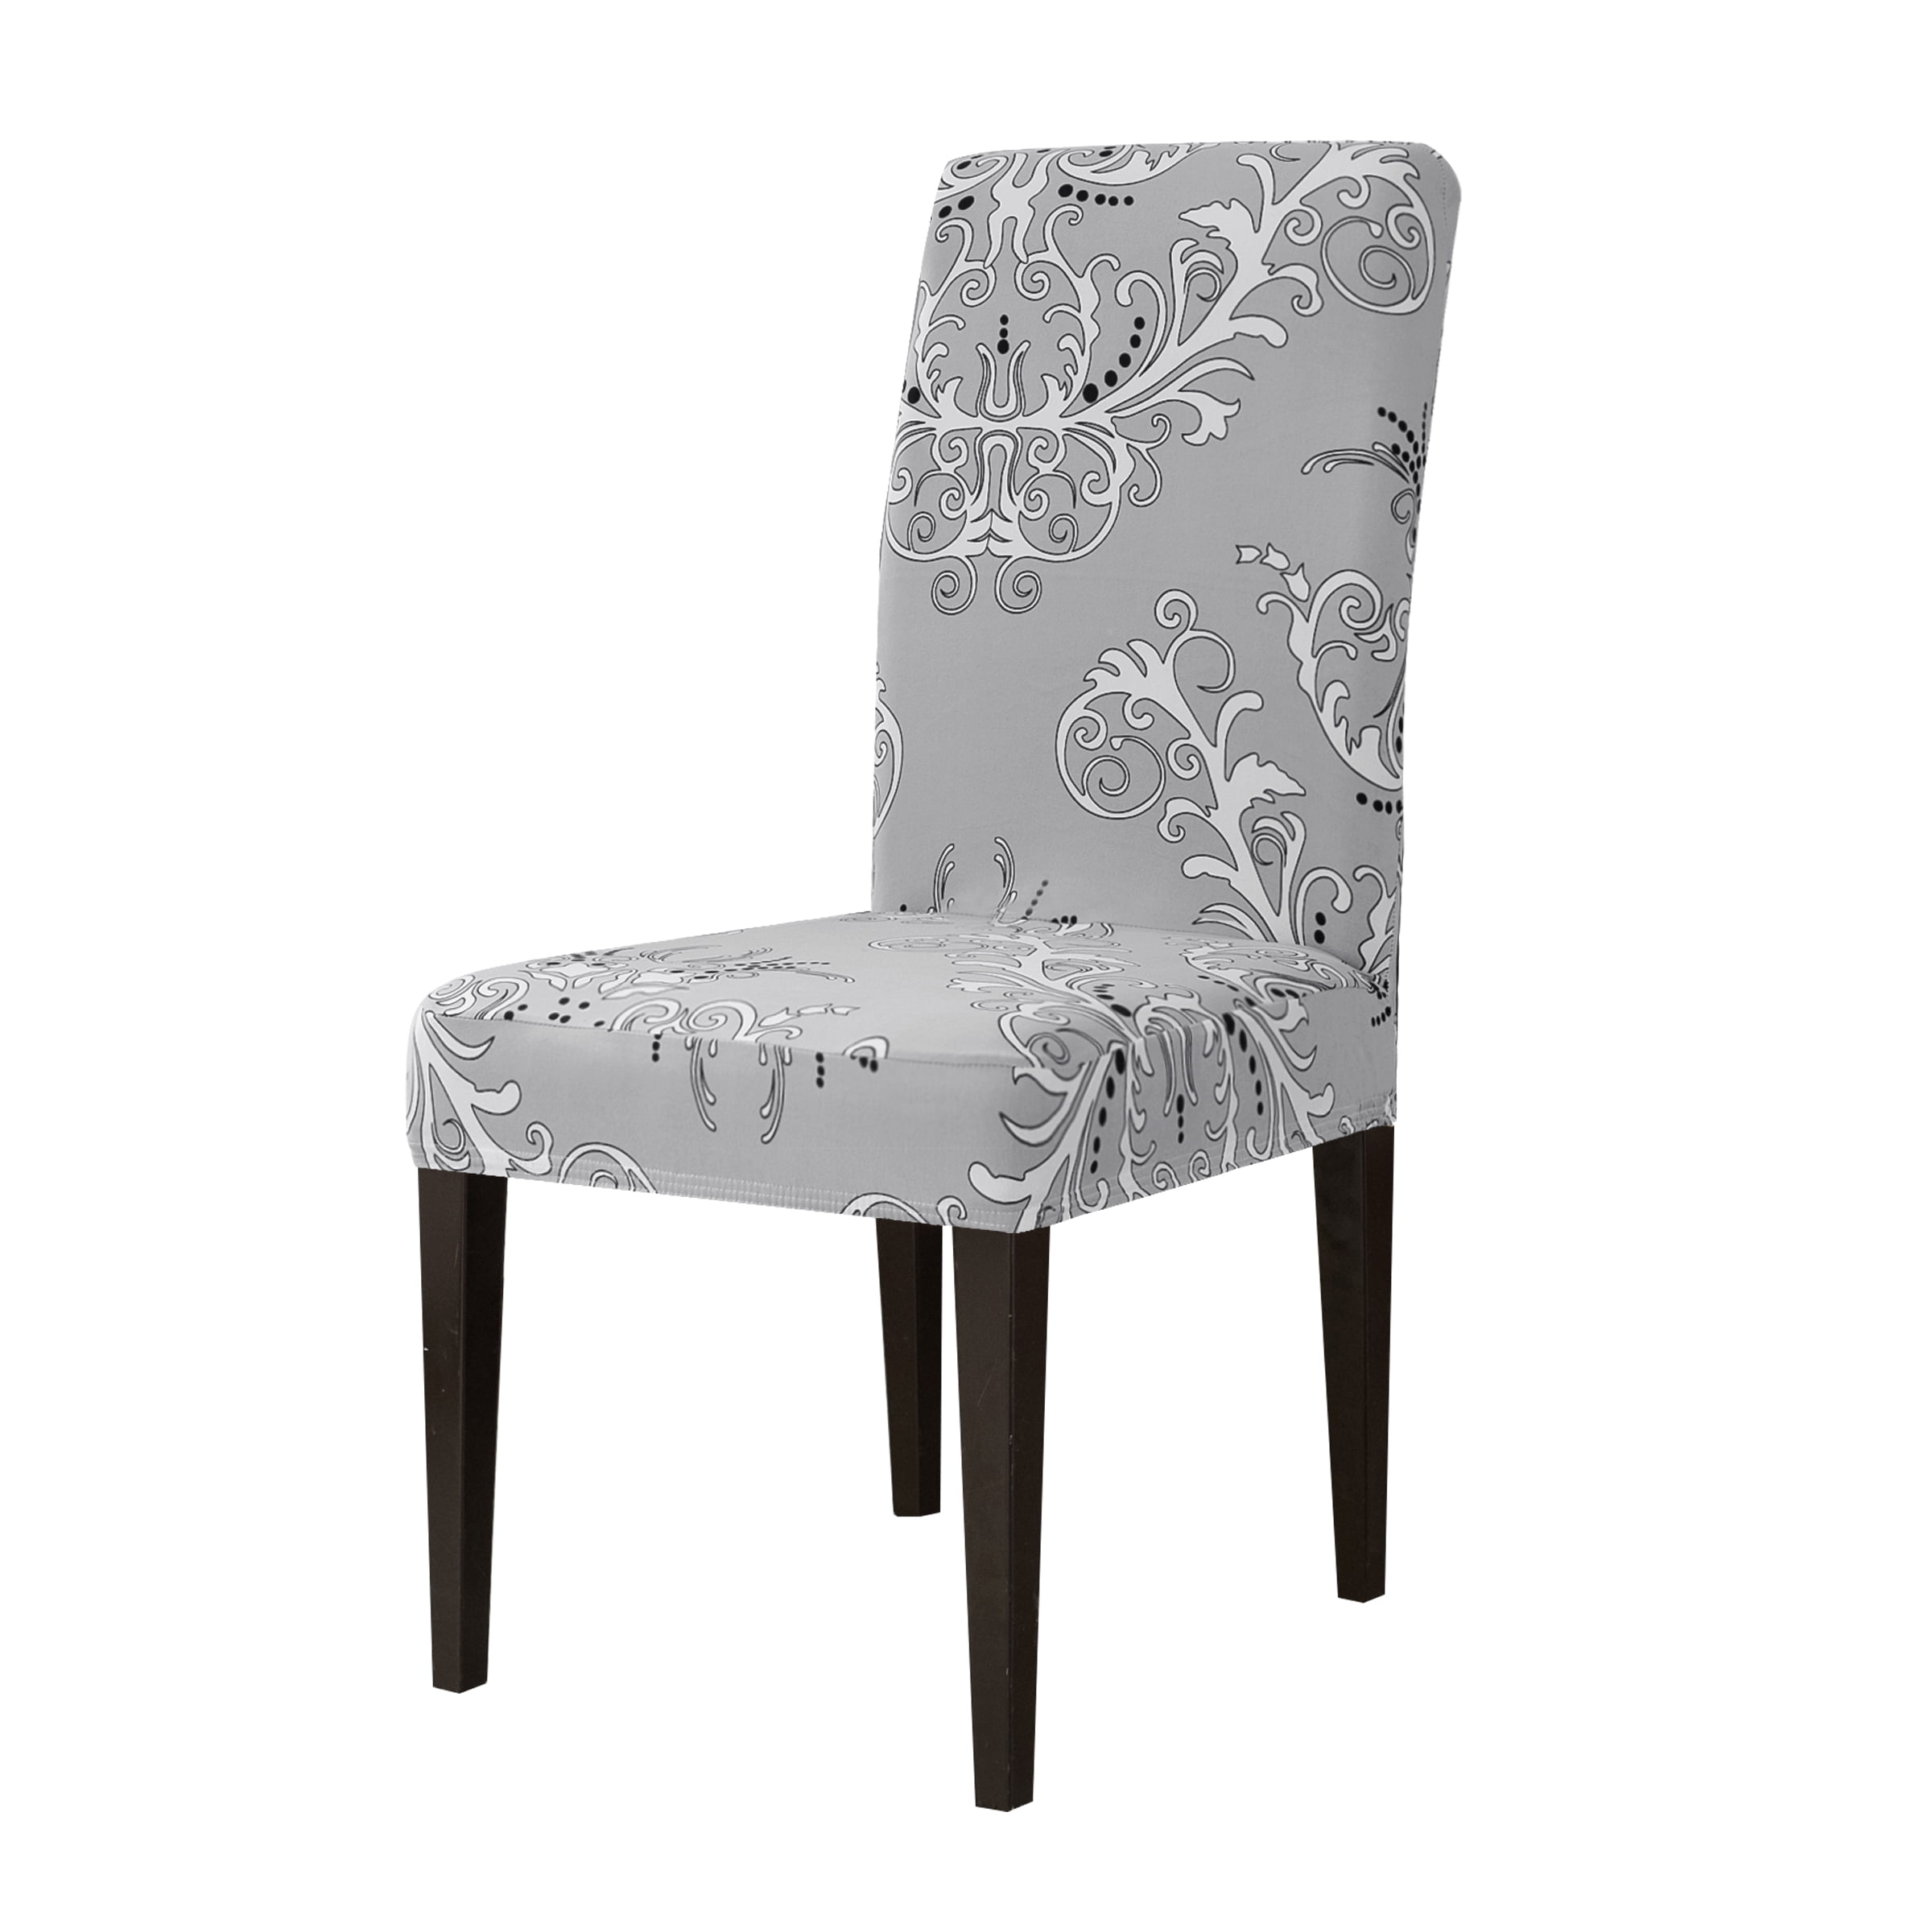 Blue Vintage Floral Damask Pattern Dining Chair Cover Slipcover 